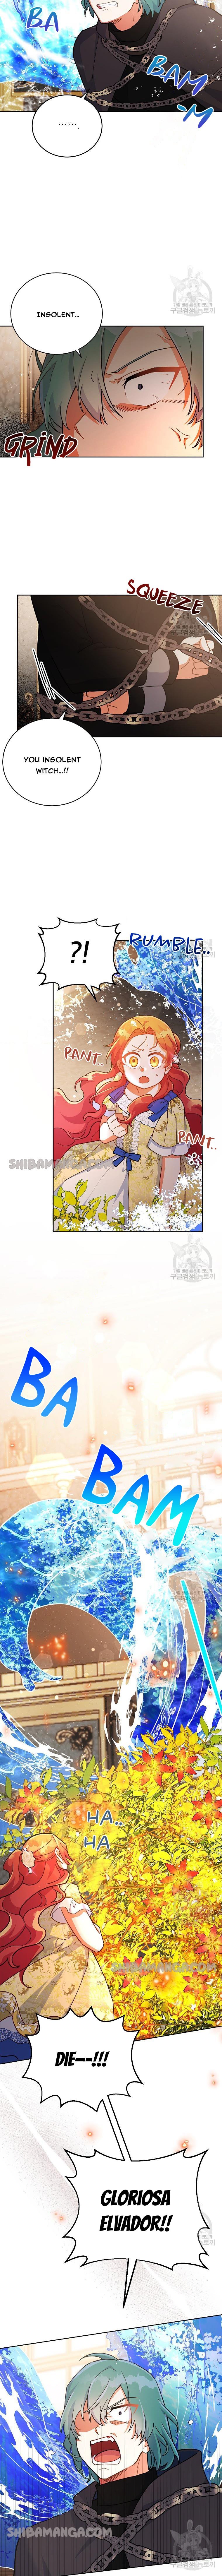 The Little Lord Who Makes Flowers Bloom chapter 21